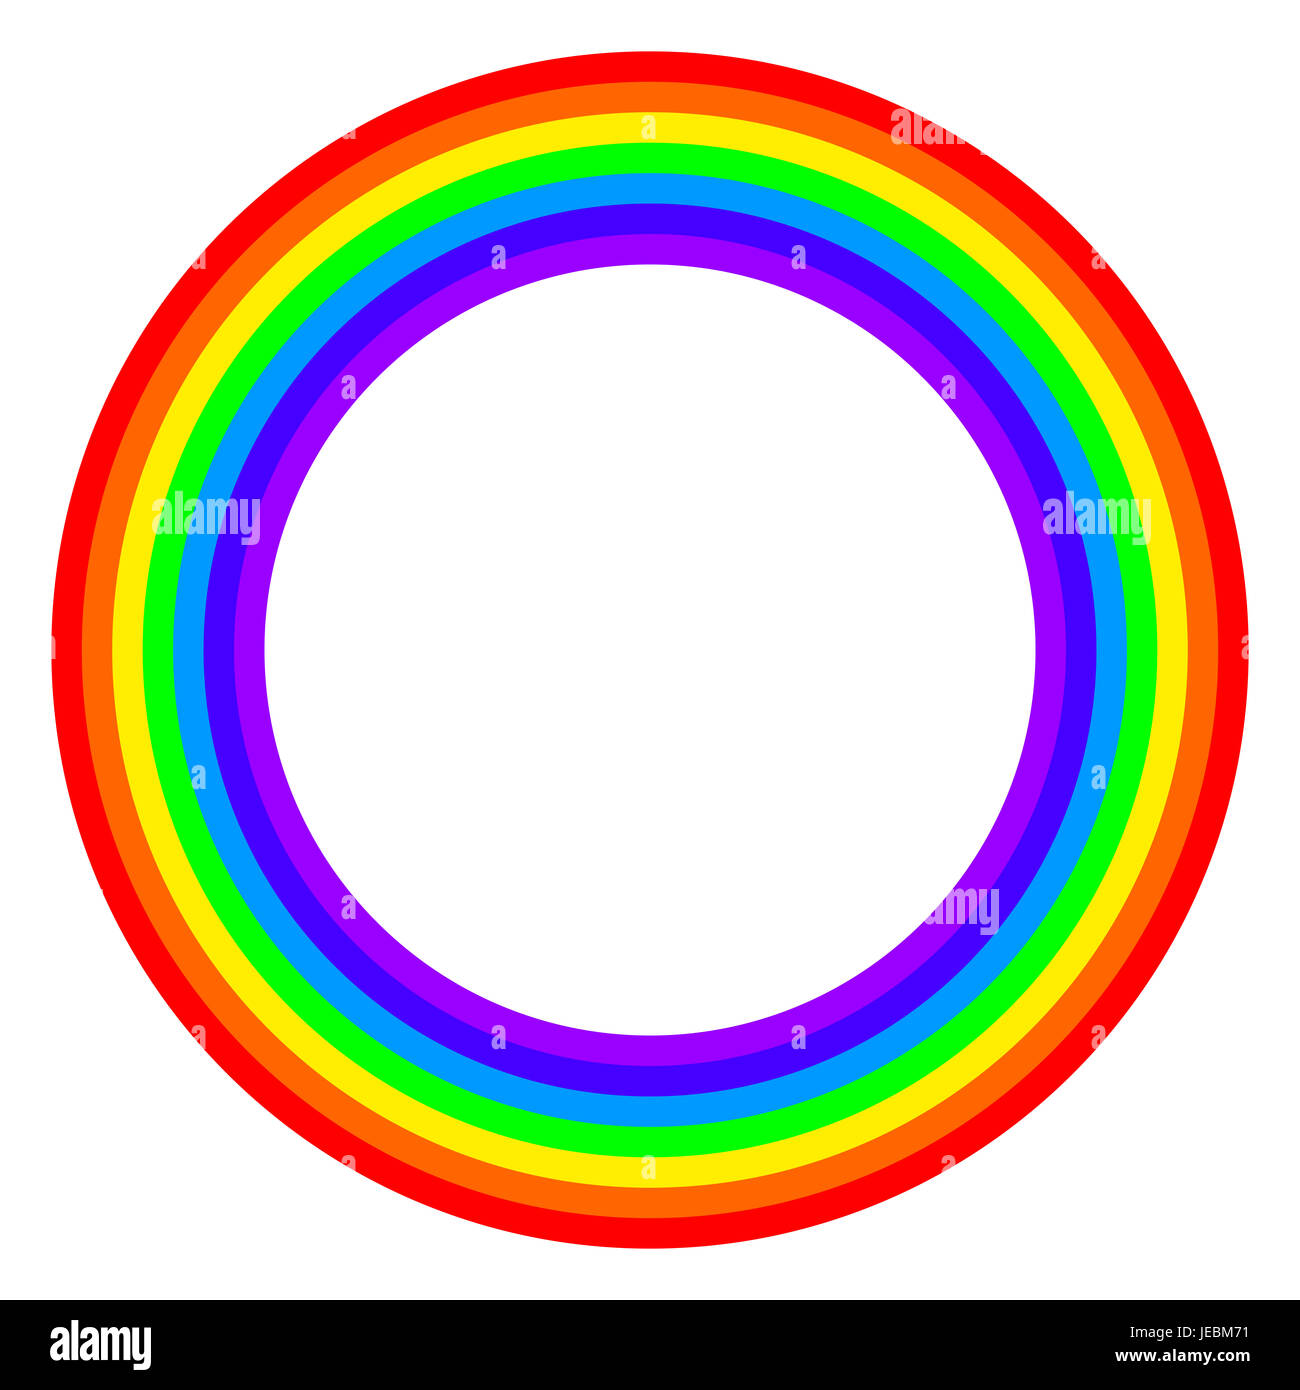 Rainbow circle spectrum colored. Ring with rainbow bands in seven colors of the spectrum and visible light. Stock Photo